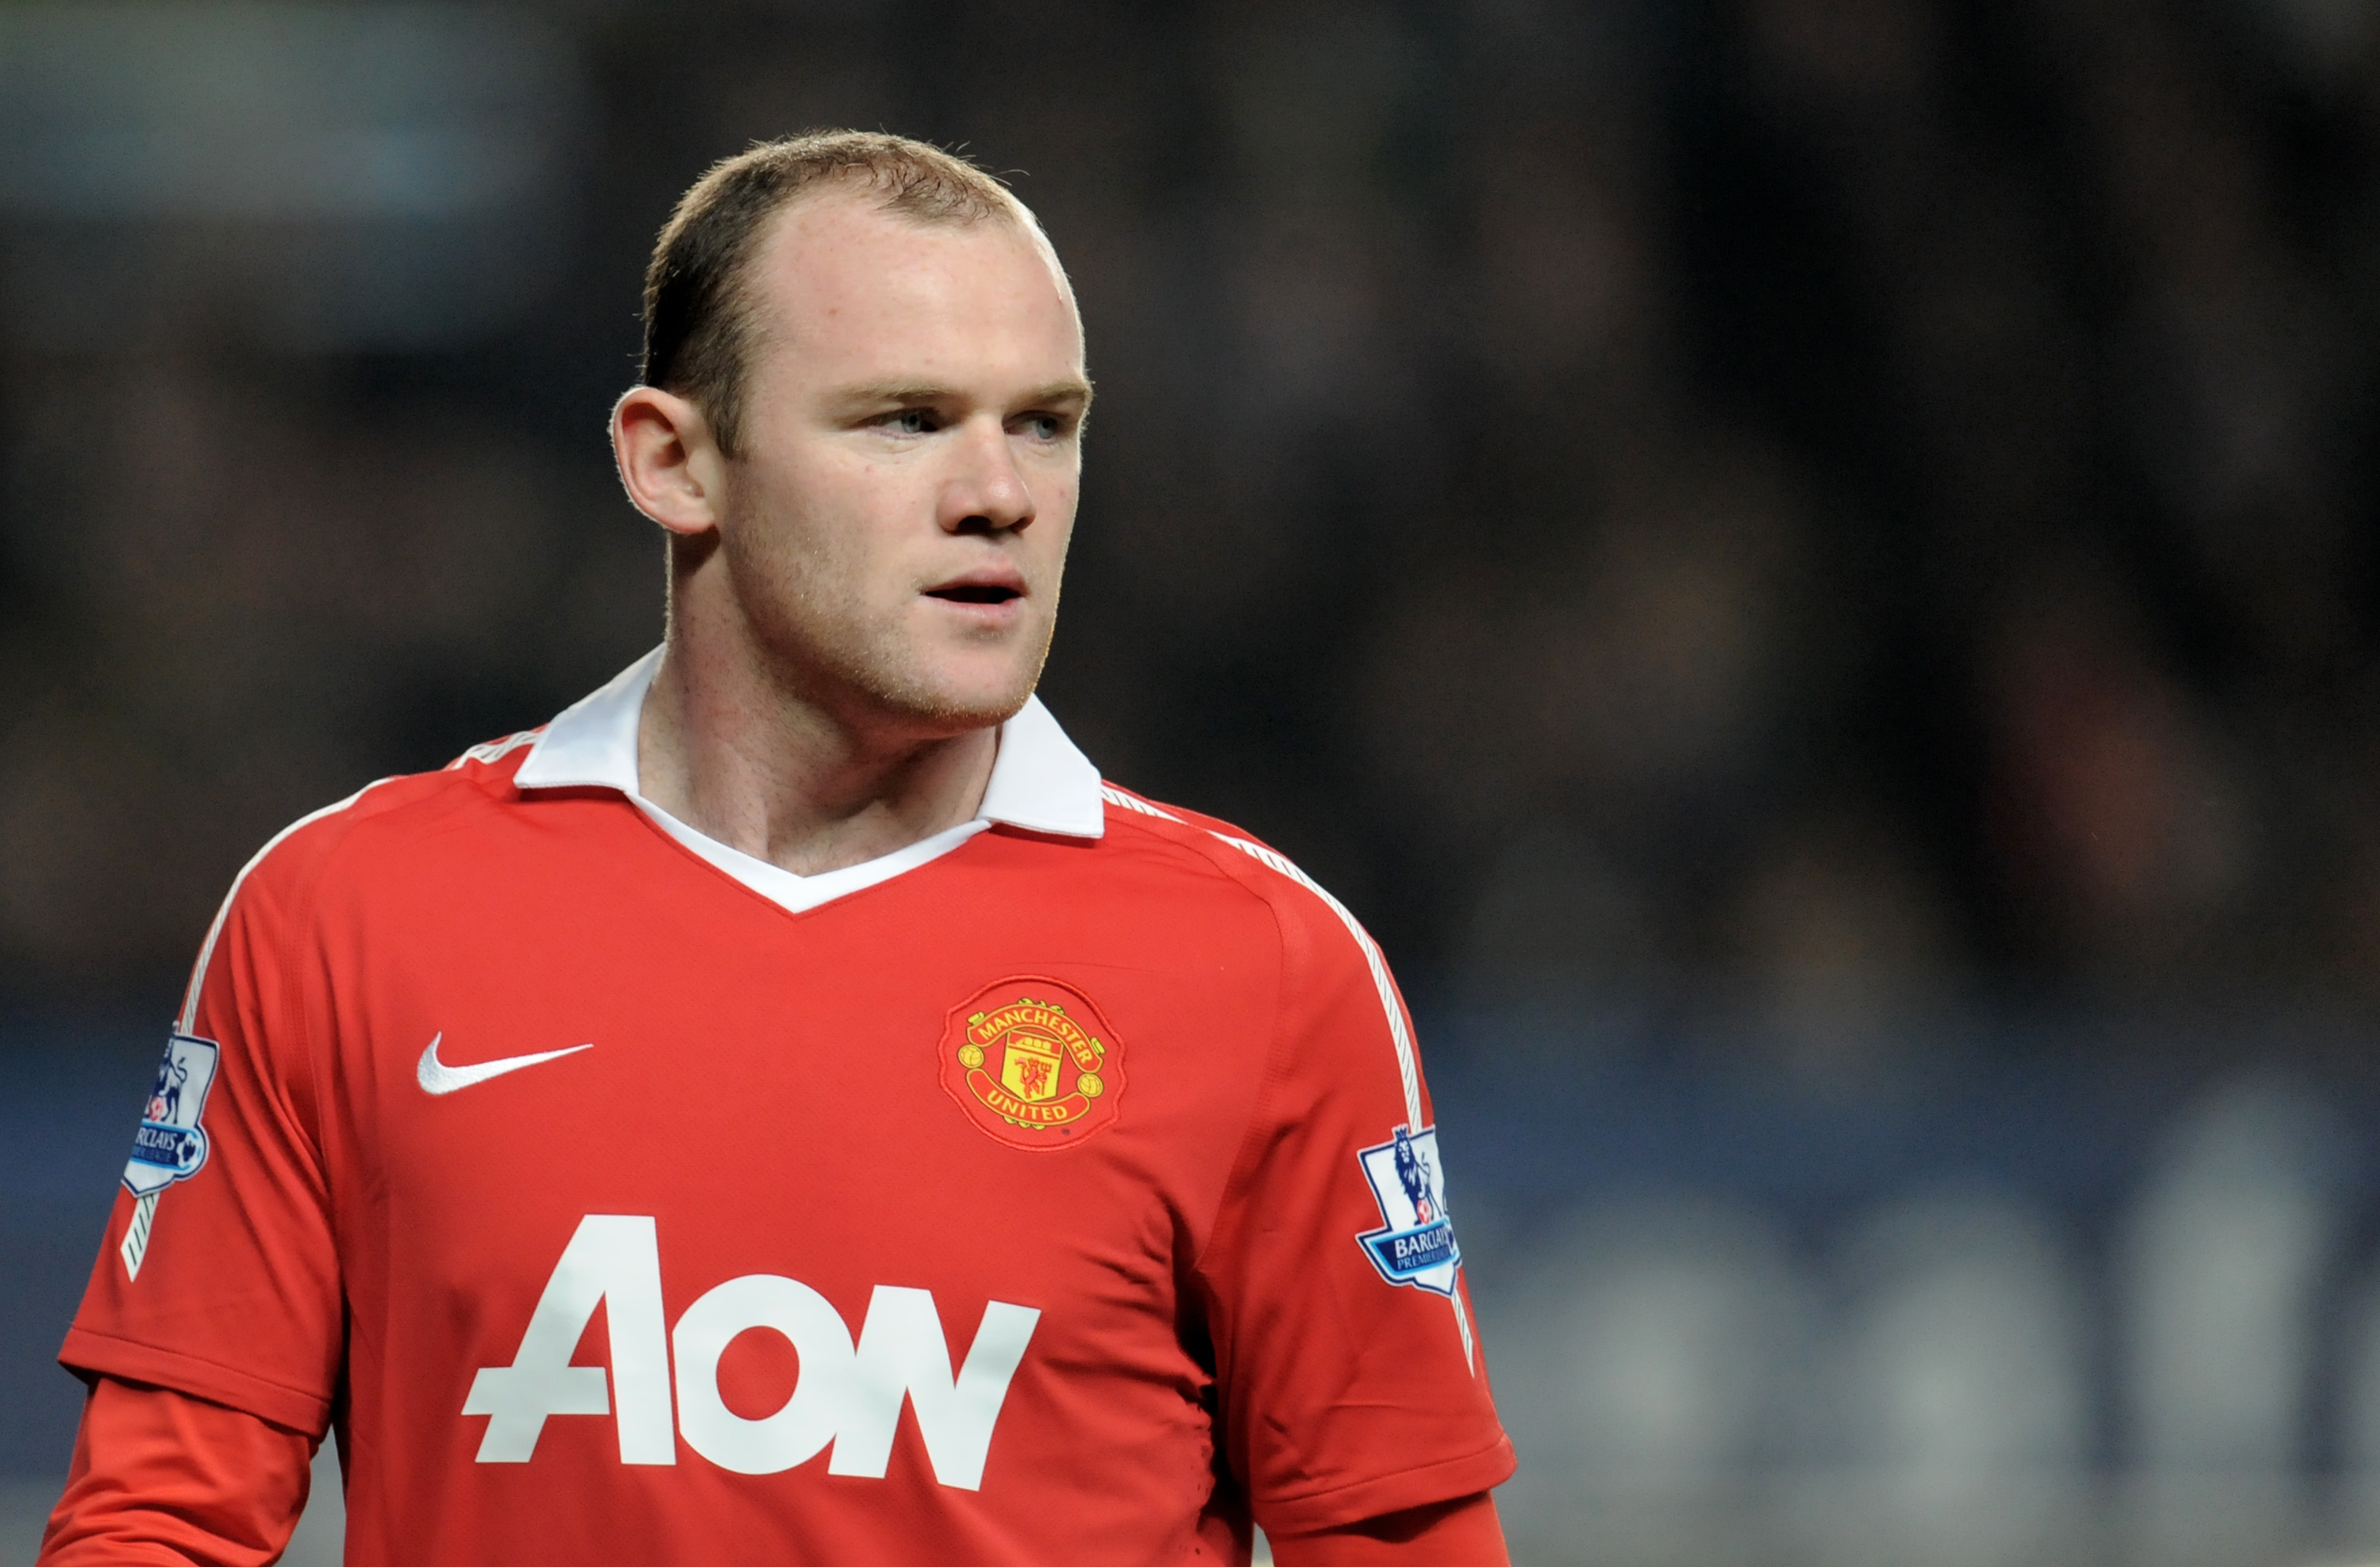 The player of Manchester United Wayne Rooney wallpapers and images